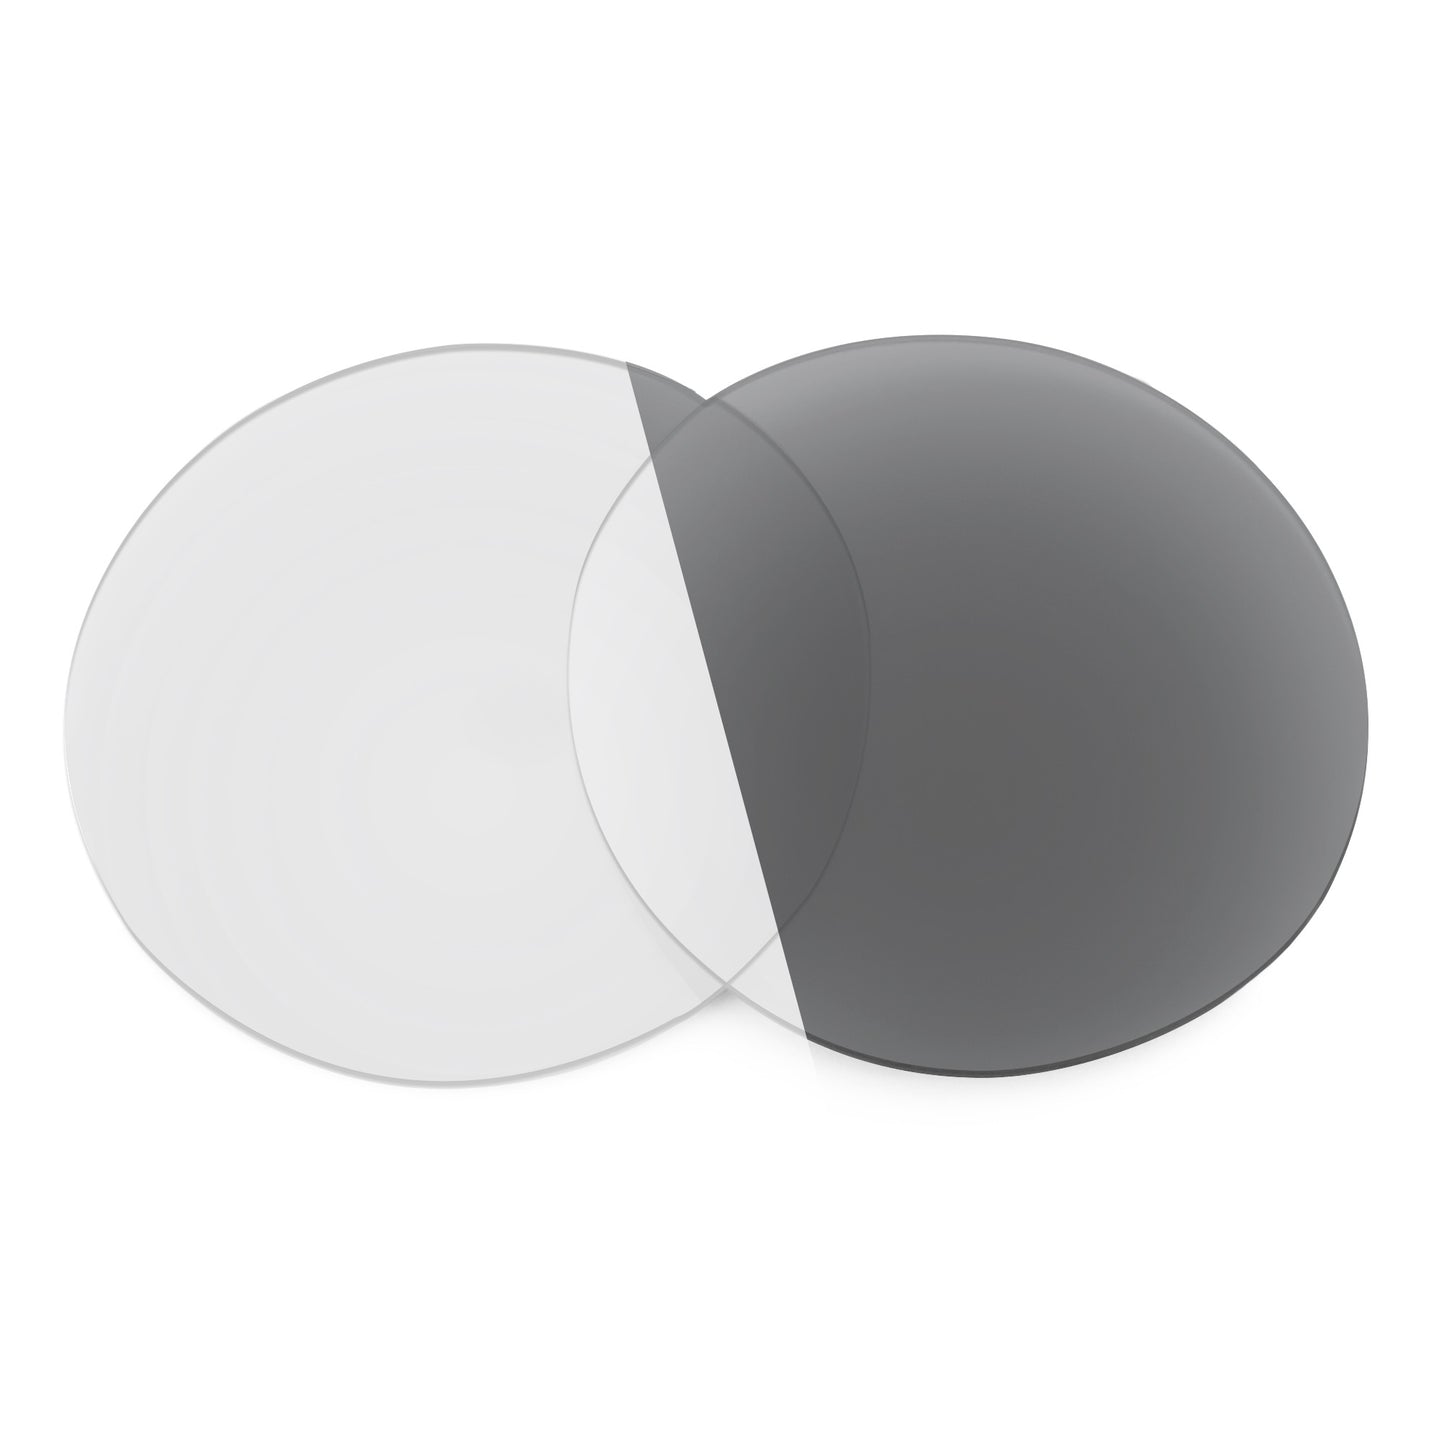 Revant replacement lenses for Ray-Ban RB3424 52mm Non-Polarized Adapt Gray Photochromic